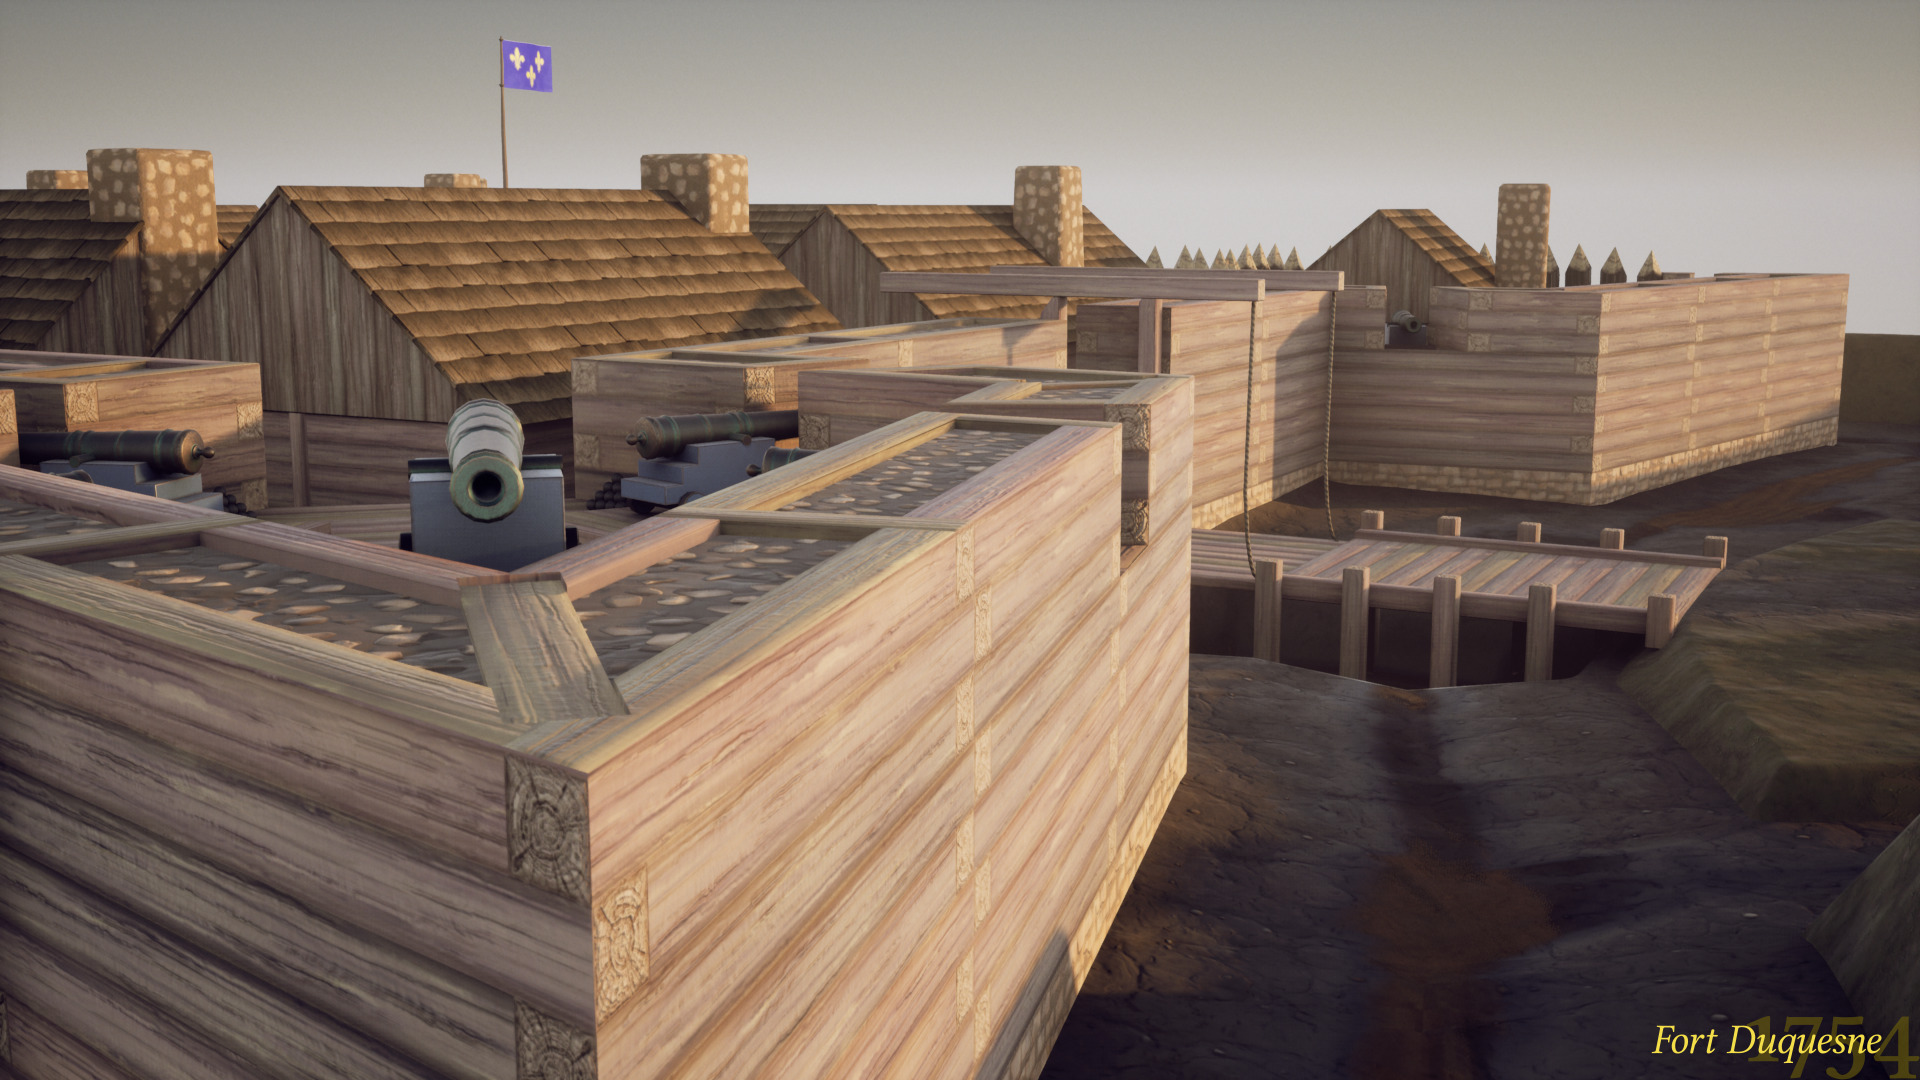 A 3D model of the front view of Fort Duquesne, a wooden fort with a star-shaped design. The fort has a pentagonal bastion in the foreground, with a lookout opening and a French flag flying on a flagpole. Cannons are visible through openings in the wooden walls of the bastion. The fort's main gate is set back from the bastion and has a lowered drawbridge.